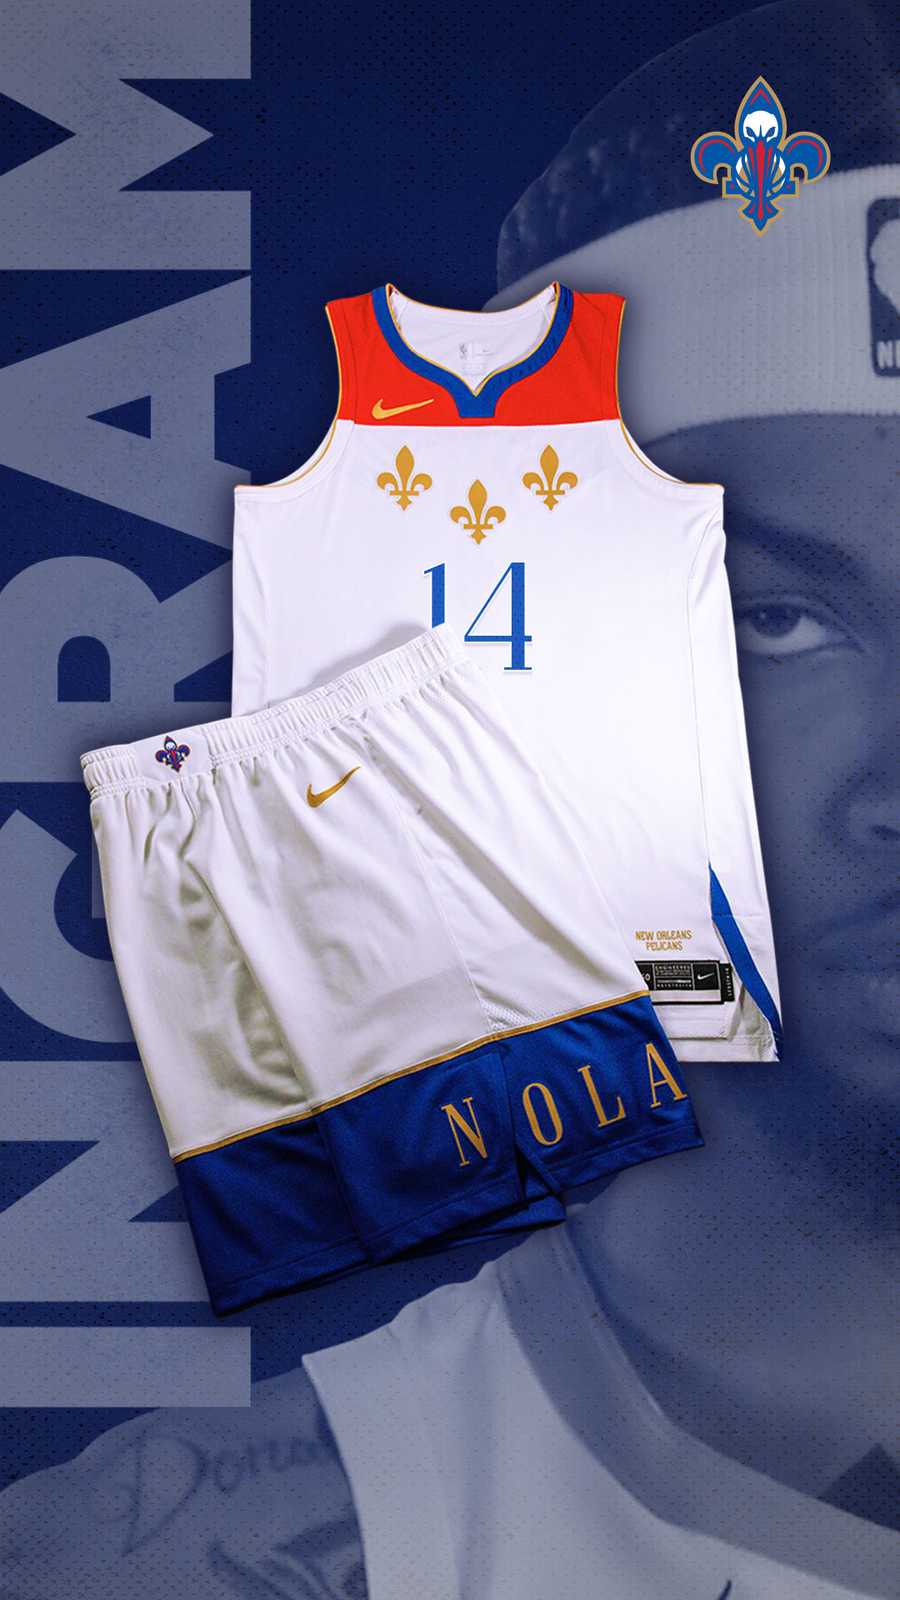 The Pelicans' City Edition uniforms are purposely simplistic. Here's why., Pelicans